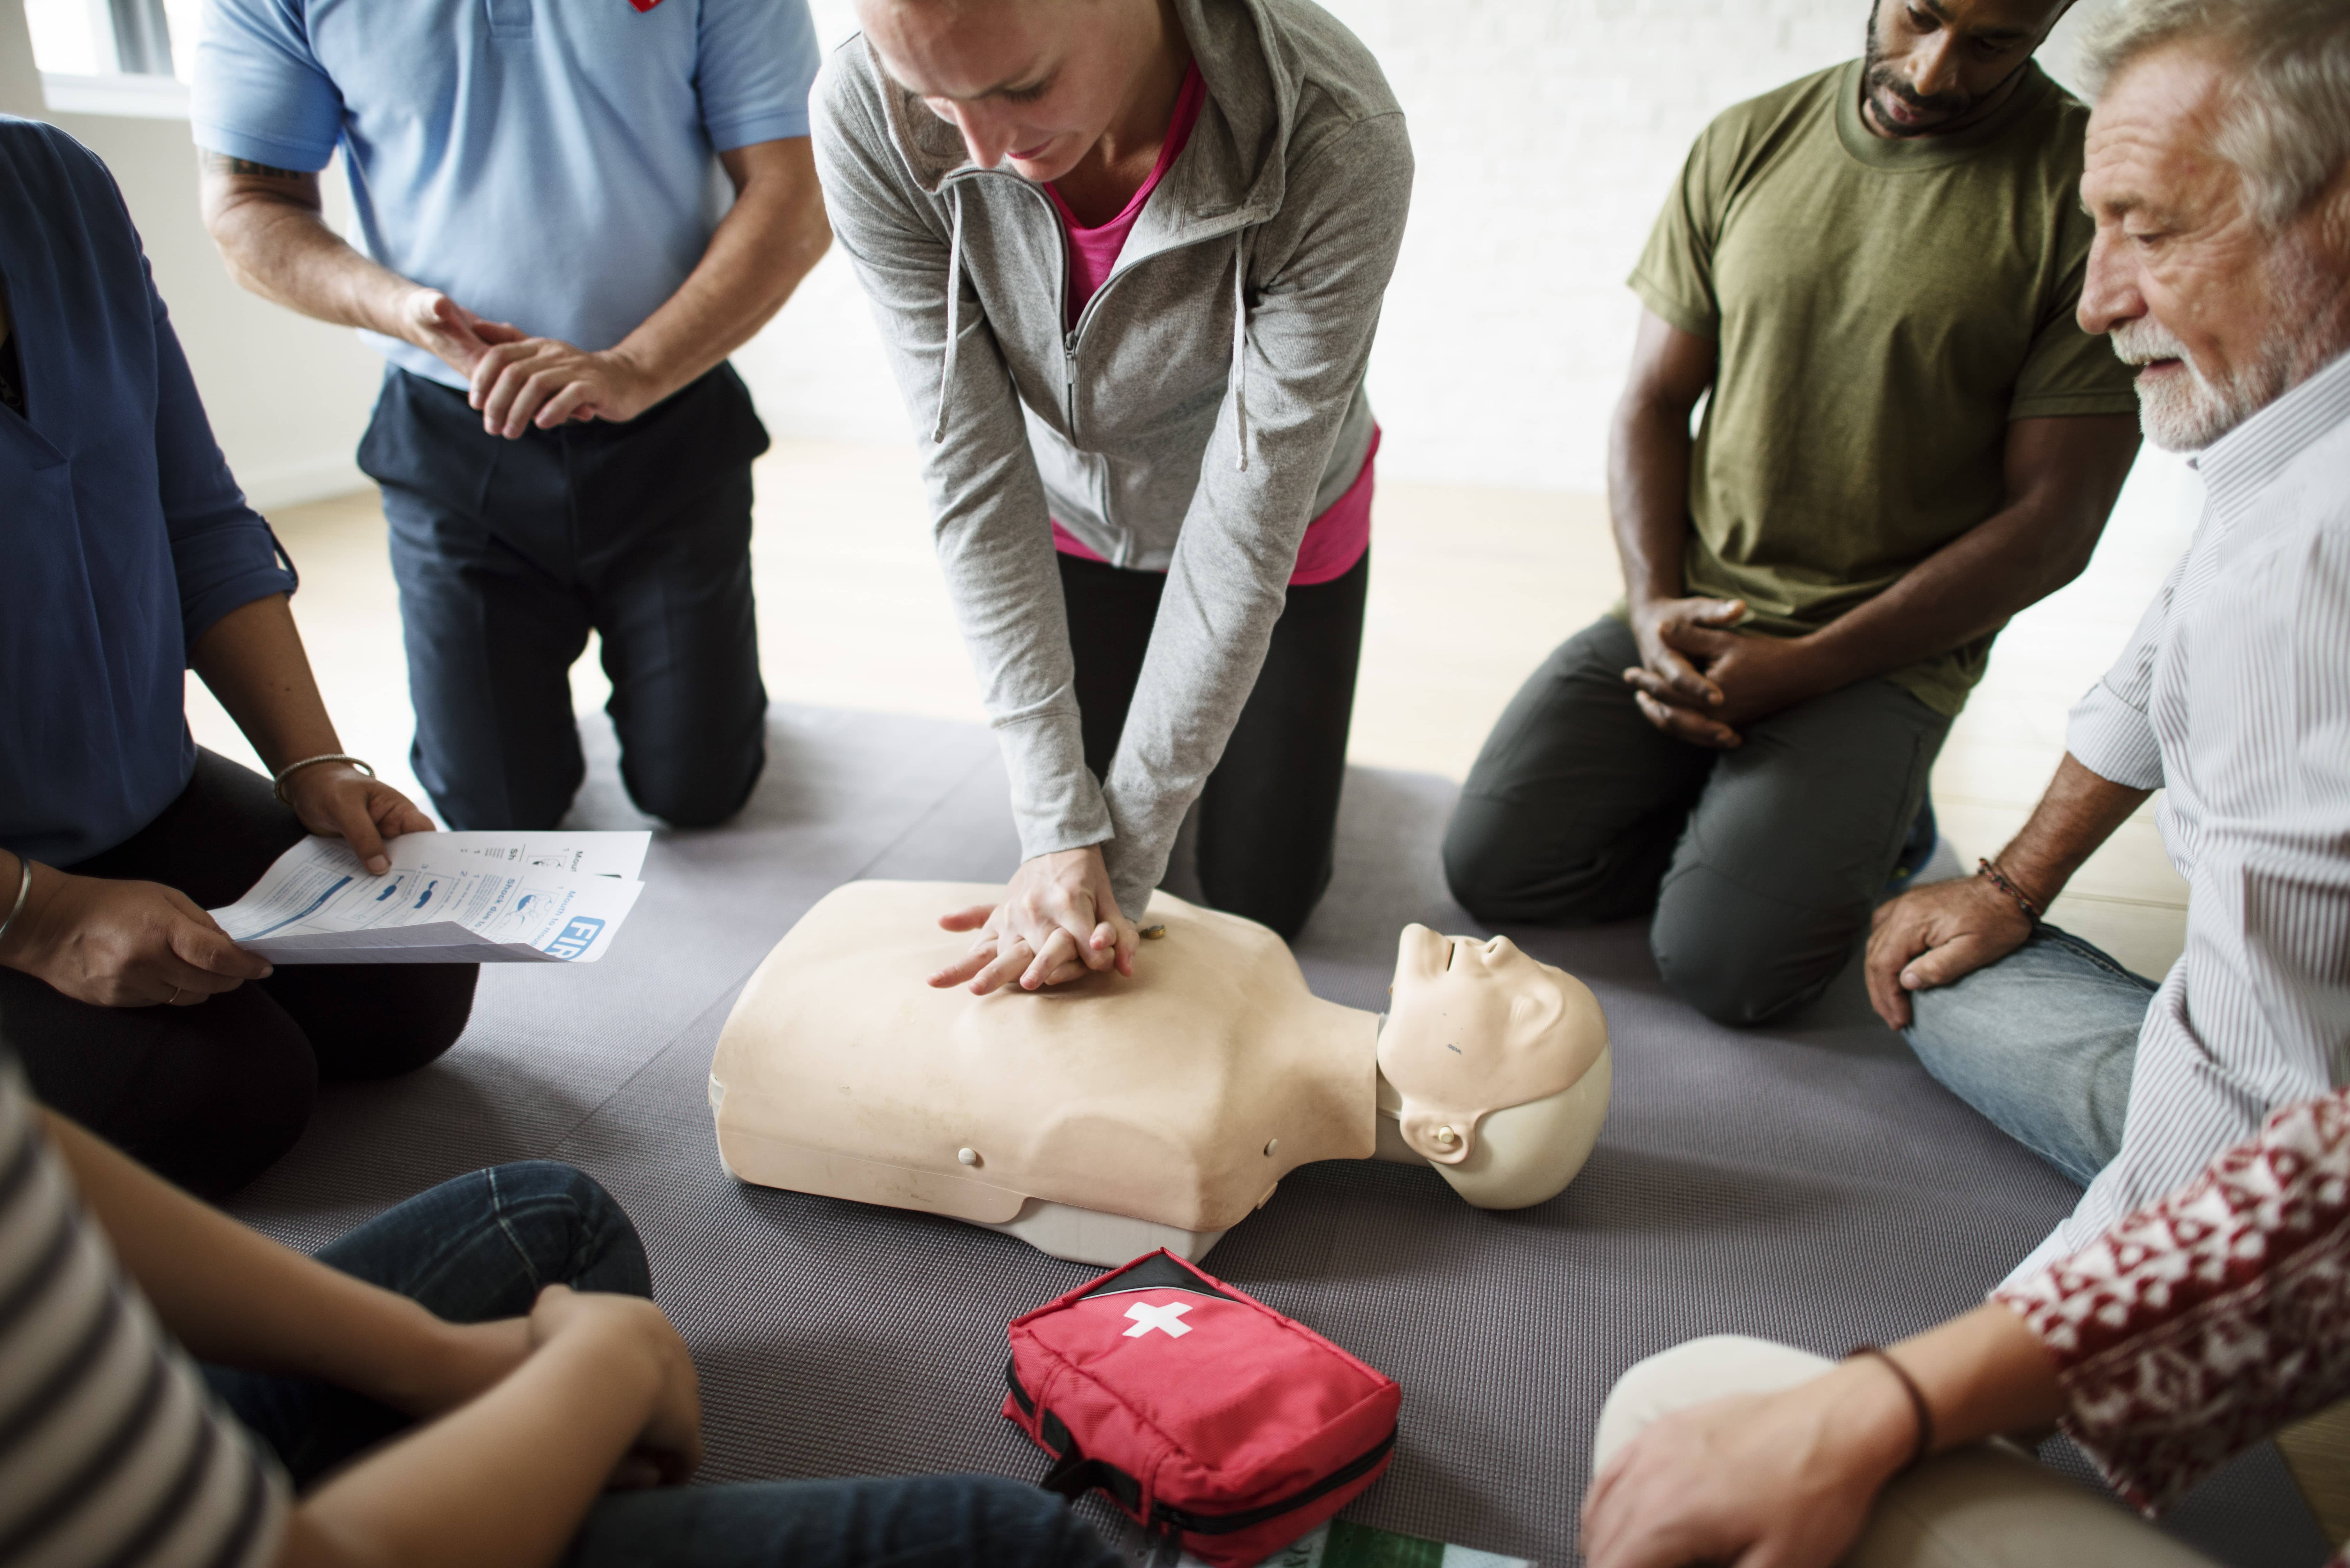 5 Steps of CPR: How to Do CPR on Adults, Children & Infants